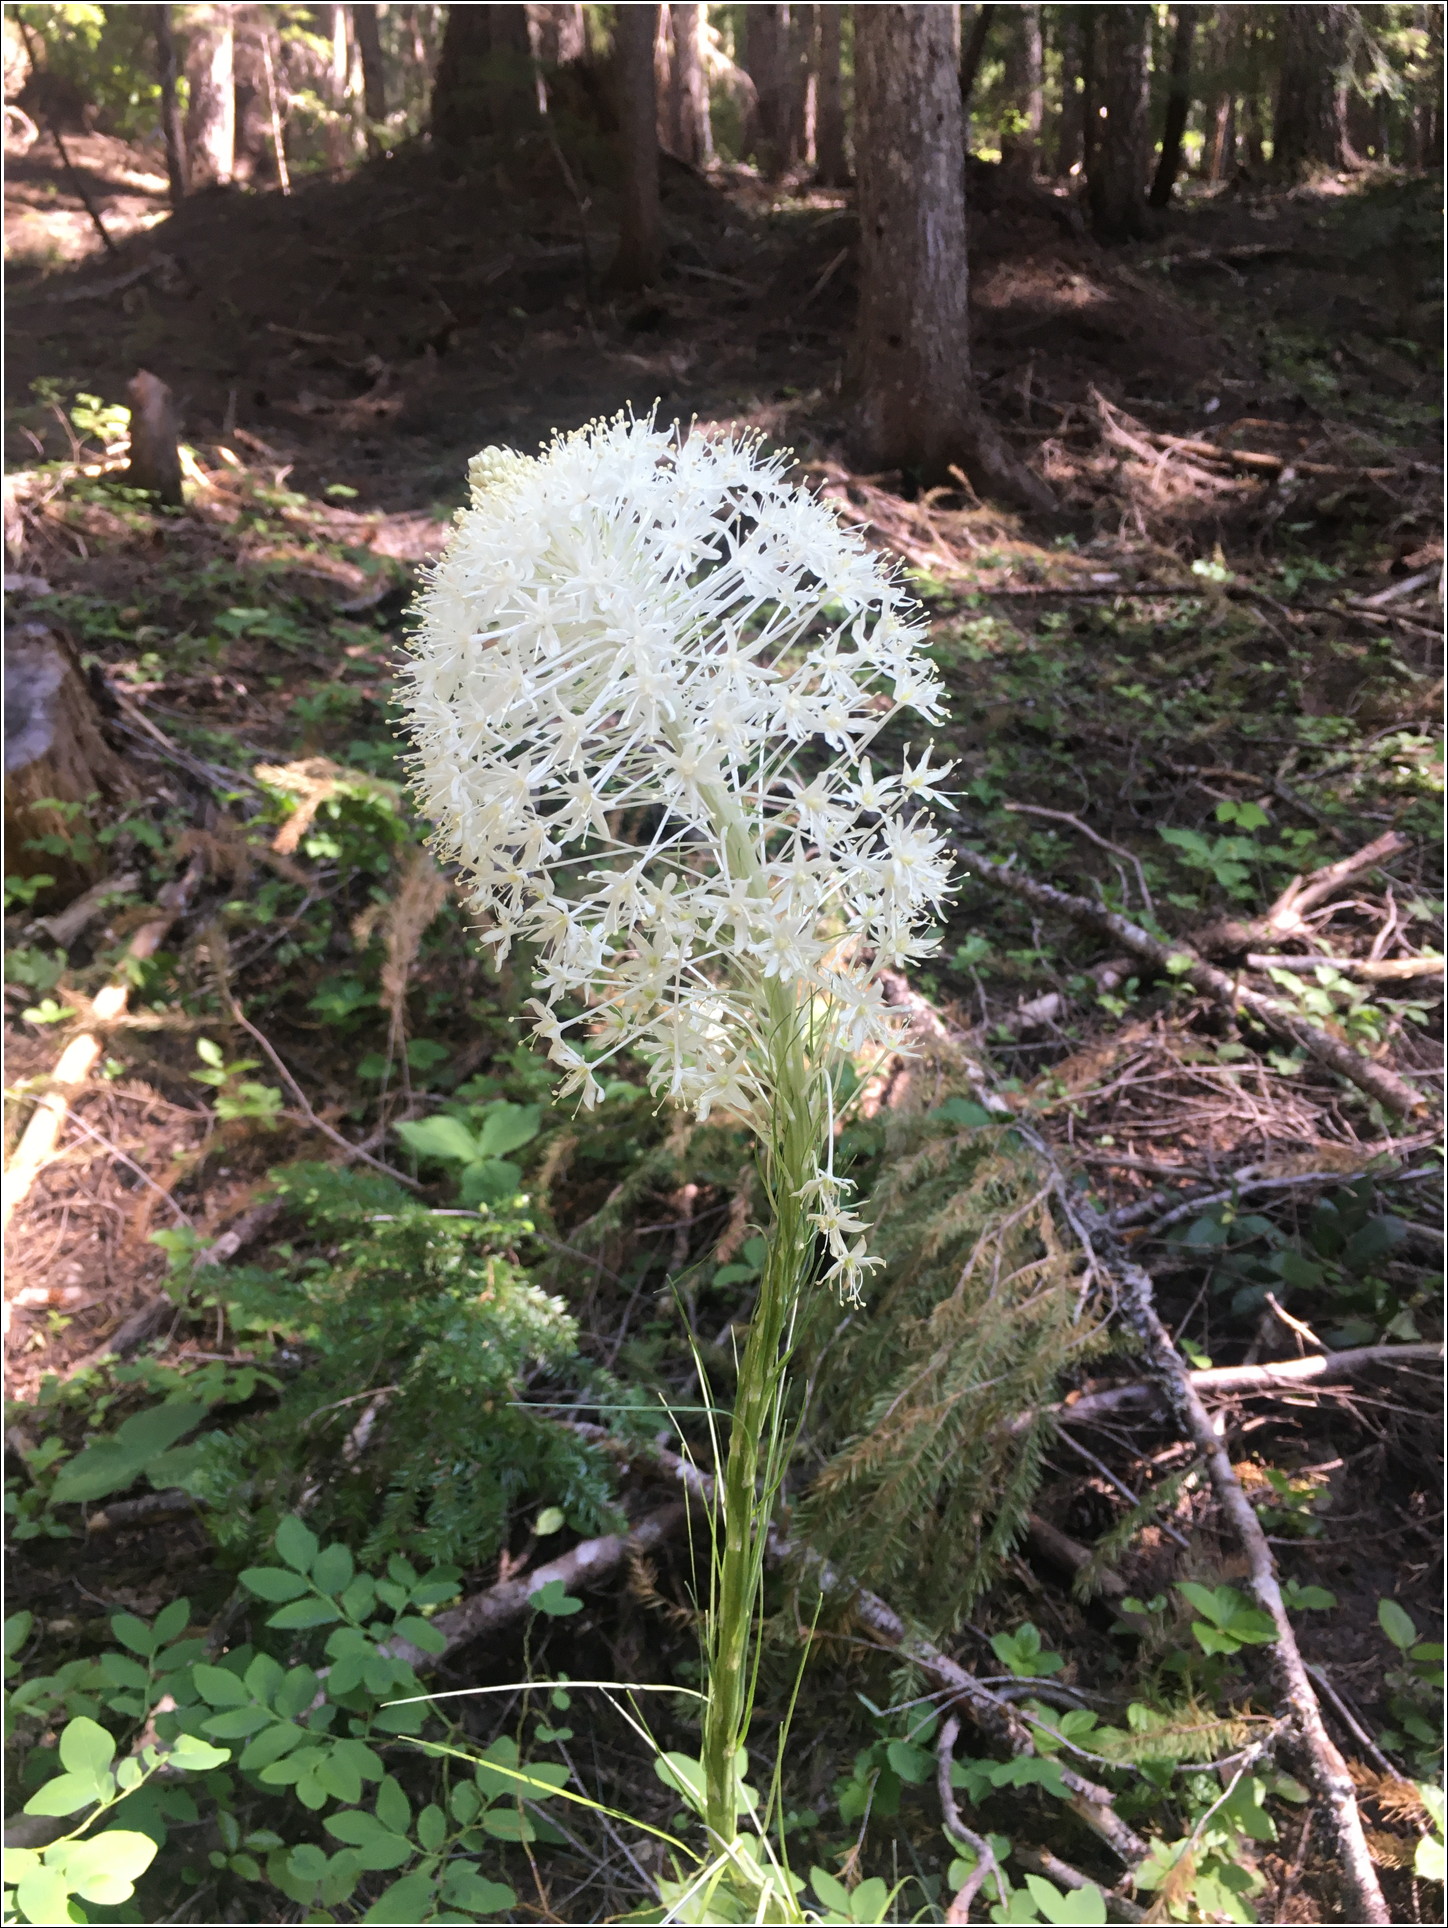 Bear grass (photographed by the bare B!)